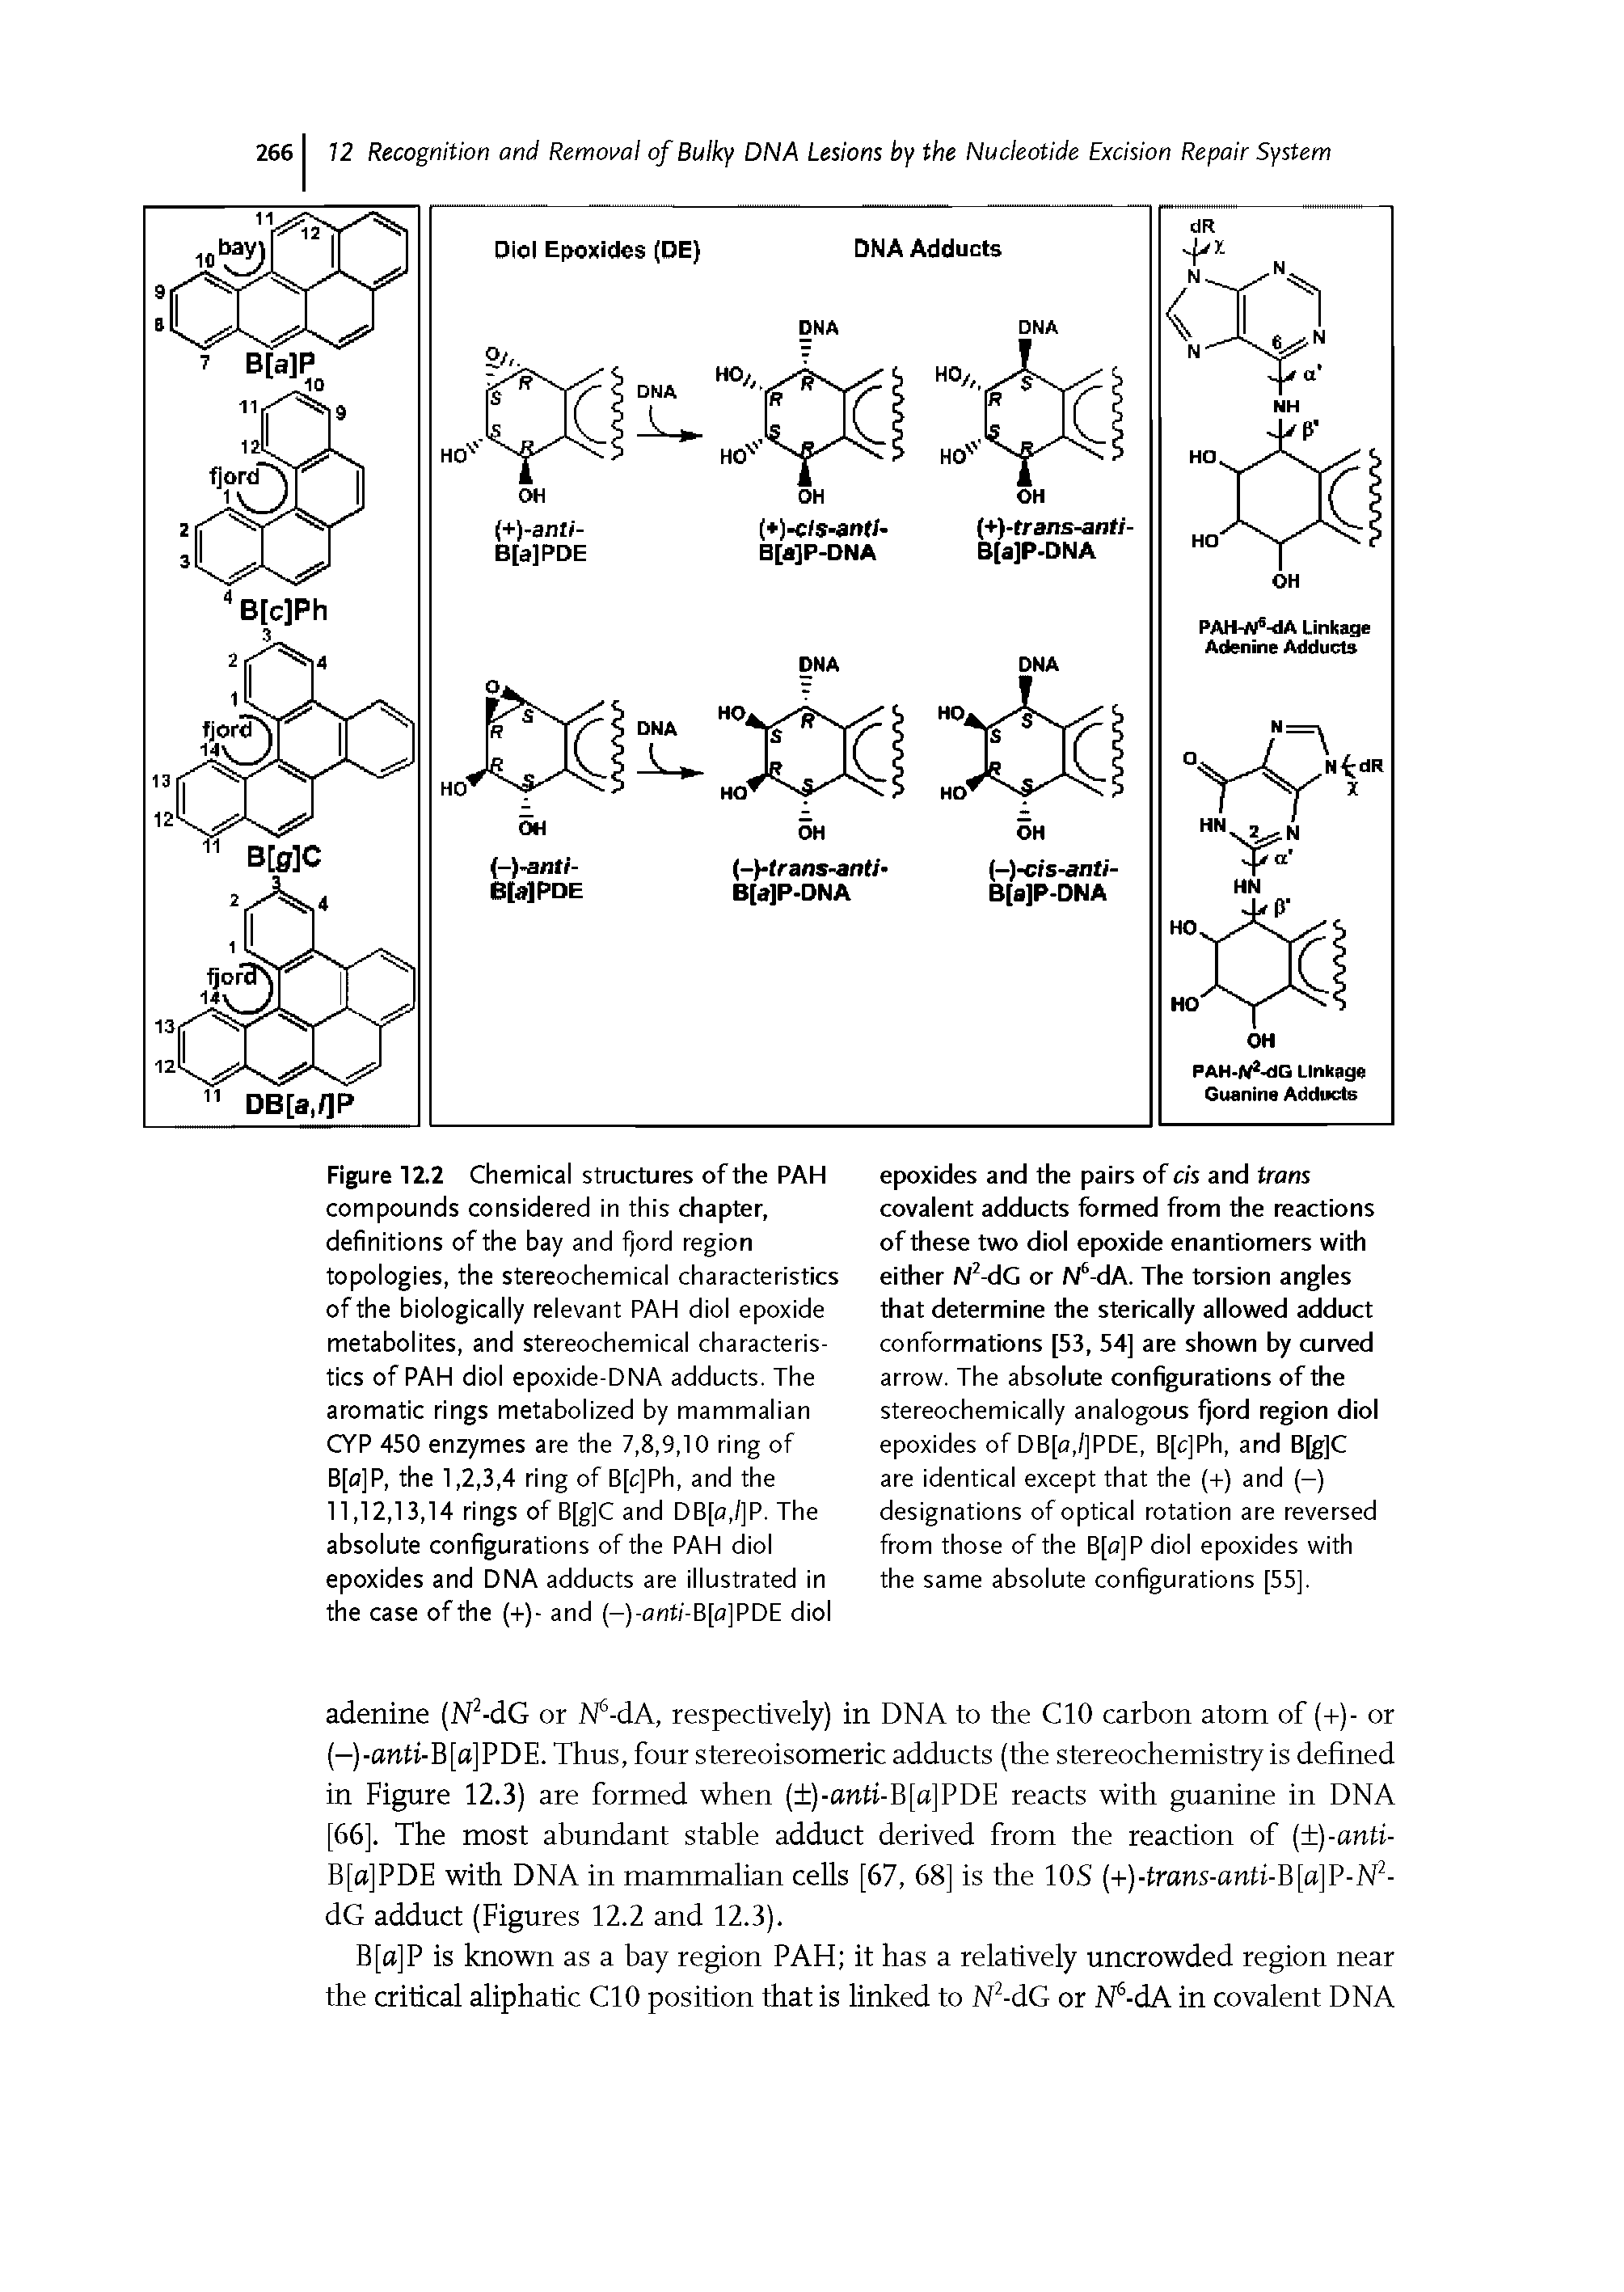 Figure 12.2 Chemical structures of the PAH compounds considered in this chapter, definitions of the bay and fjord region topologies, the stereochemical characteristics of the biologically relevant PAH diol epoxide metabolites, and stereochemical characteristics of PAH diol epoxide-DNA adducts. The aromatic rings metabolized by mammalian CYP 450 enzymes are the 7,8,9,10 ring of B[o]P, the 1,2,3,4 ring of B[c]Ph, and the 11,12,13,14 rings of B[g]C and DB[o,/]P. The absolute configurations of the PAH diol epoxides and DNA adducts are illustrated in the case of the (+)- and (-)-arrt/-B[a]PDE diol...